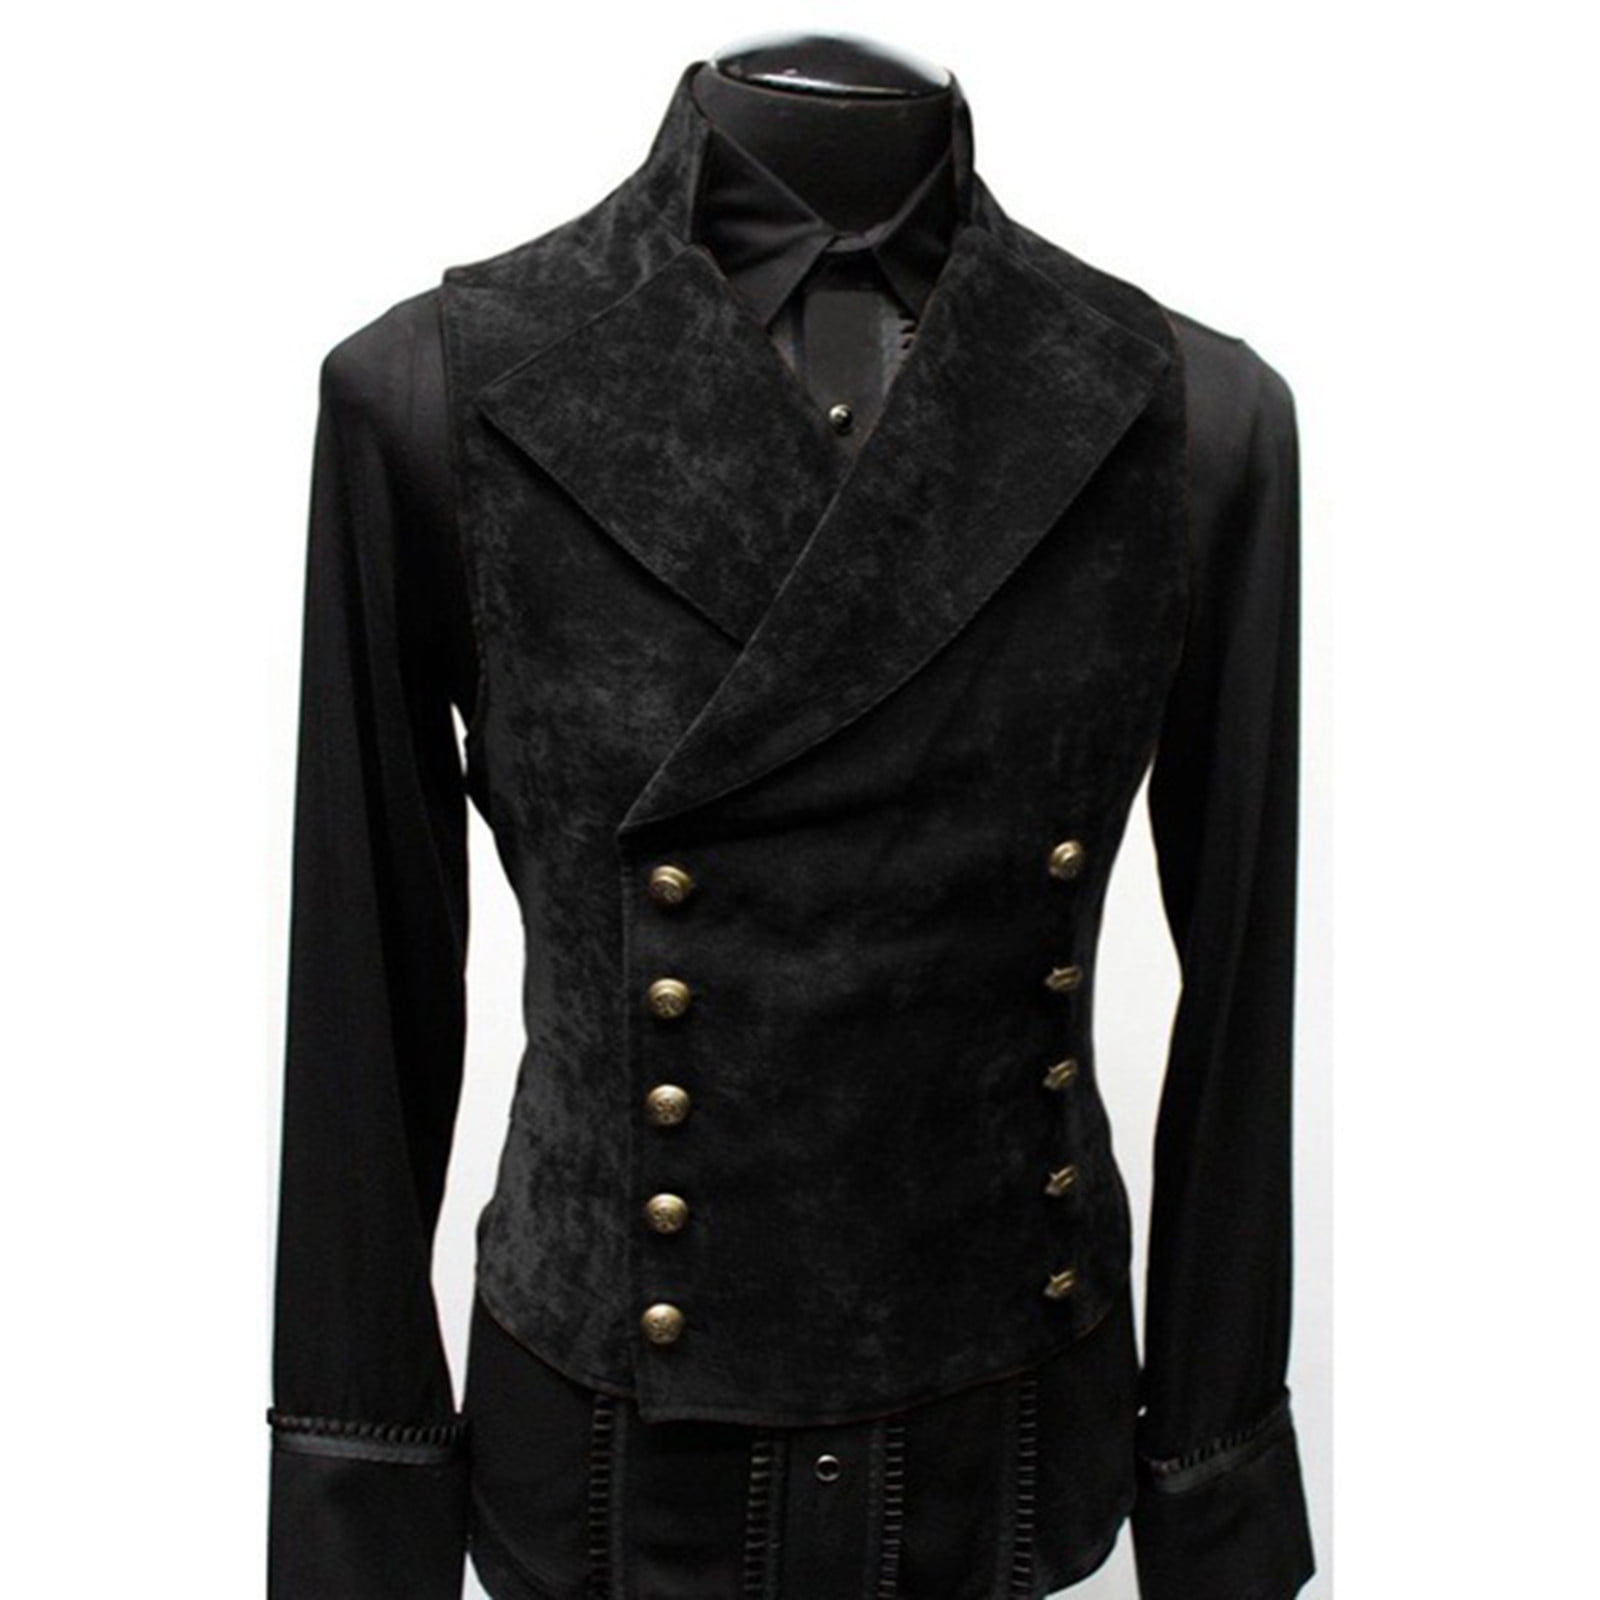 Xysaqa Mens Double Breasted Velvet Dress Vest Gothic Steampunk Prom ...